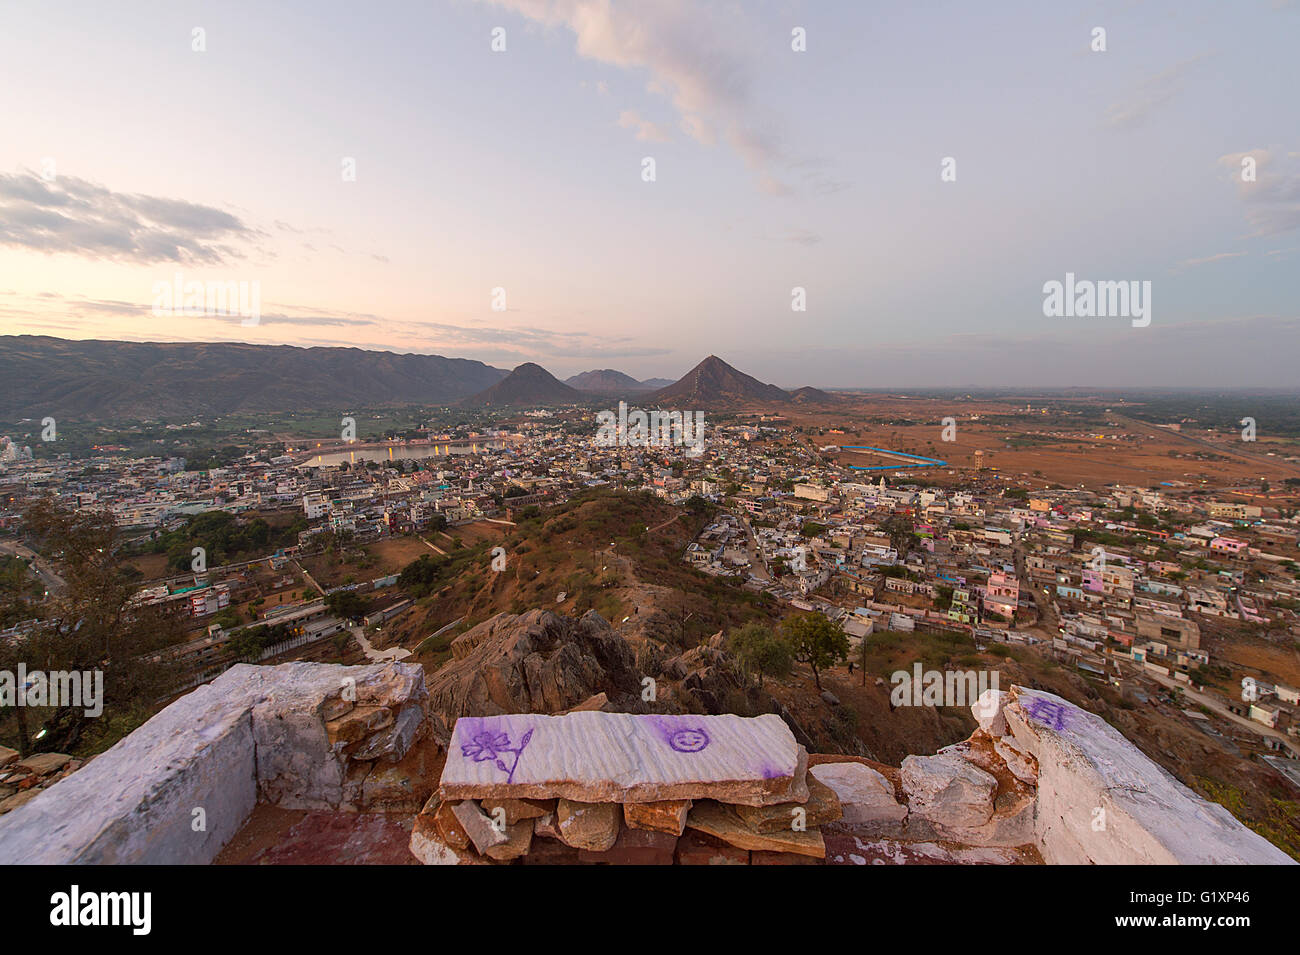 Aeriel view of Pushkar, India town after sunrise from Gayatri Temple. Stock Photo